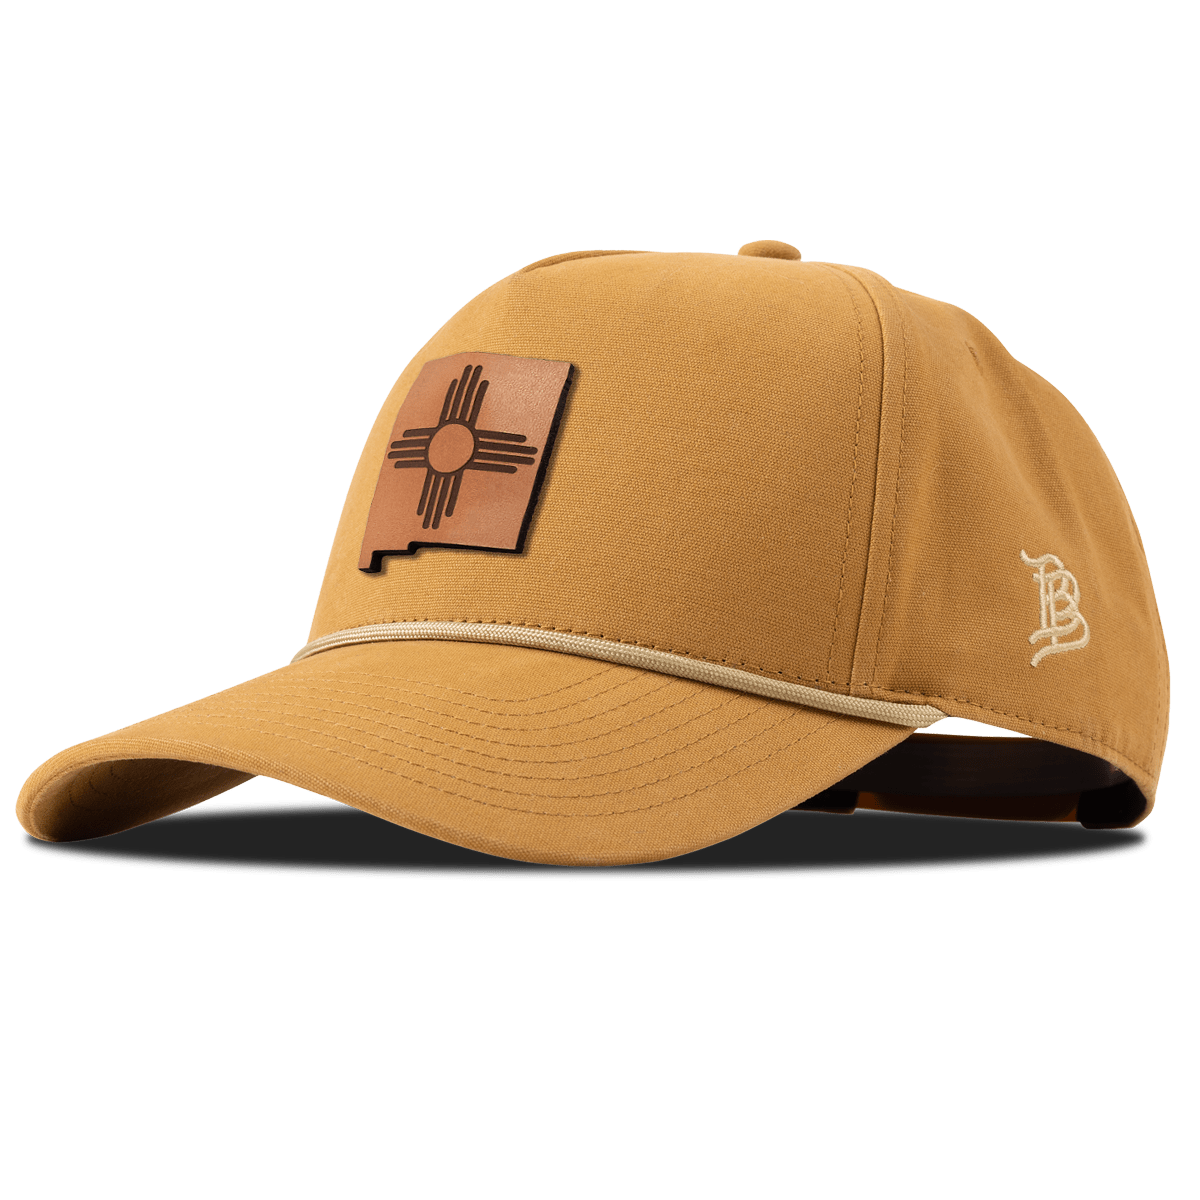 New Mexico 47 Canvas 5 Panel Rope Wheat